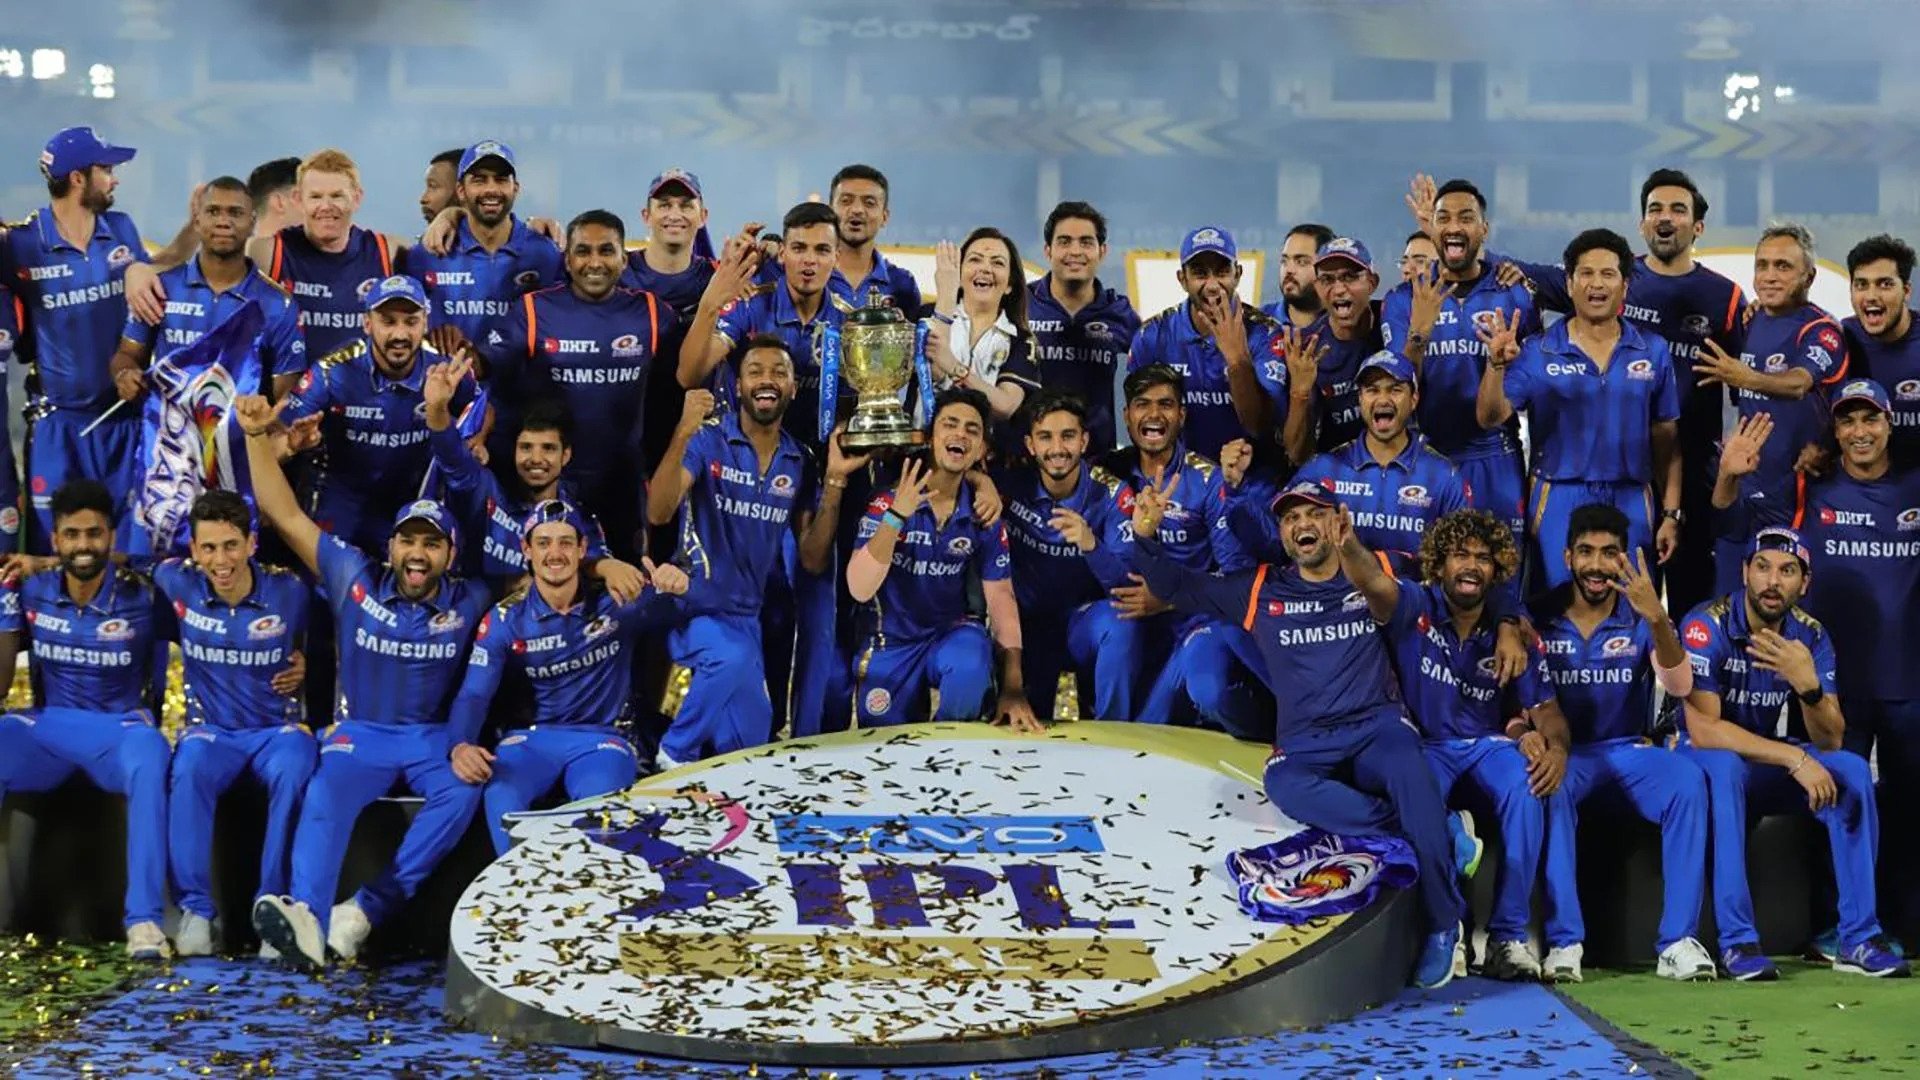 IPL 2020: Mumbai Indians Full Schedule - Date, Time and Venue Details